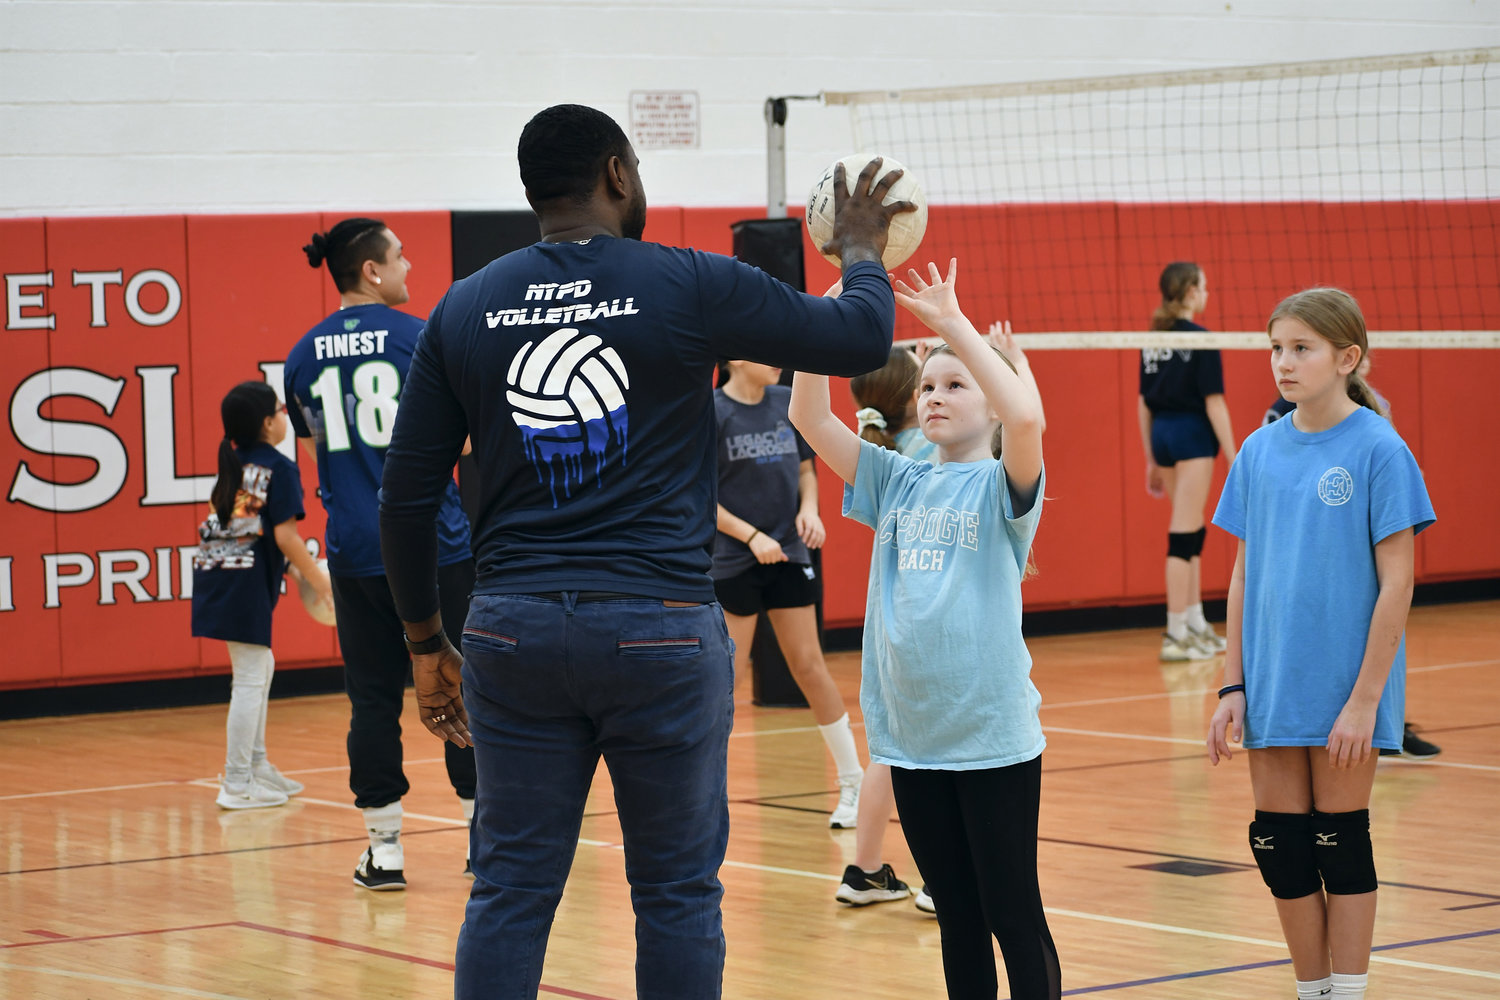 The NYPD men’s and women’s volleyball teams worked with more than 100 children, students of all ages, at the First Responders Volleyball Youth Clinic.